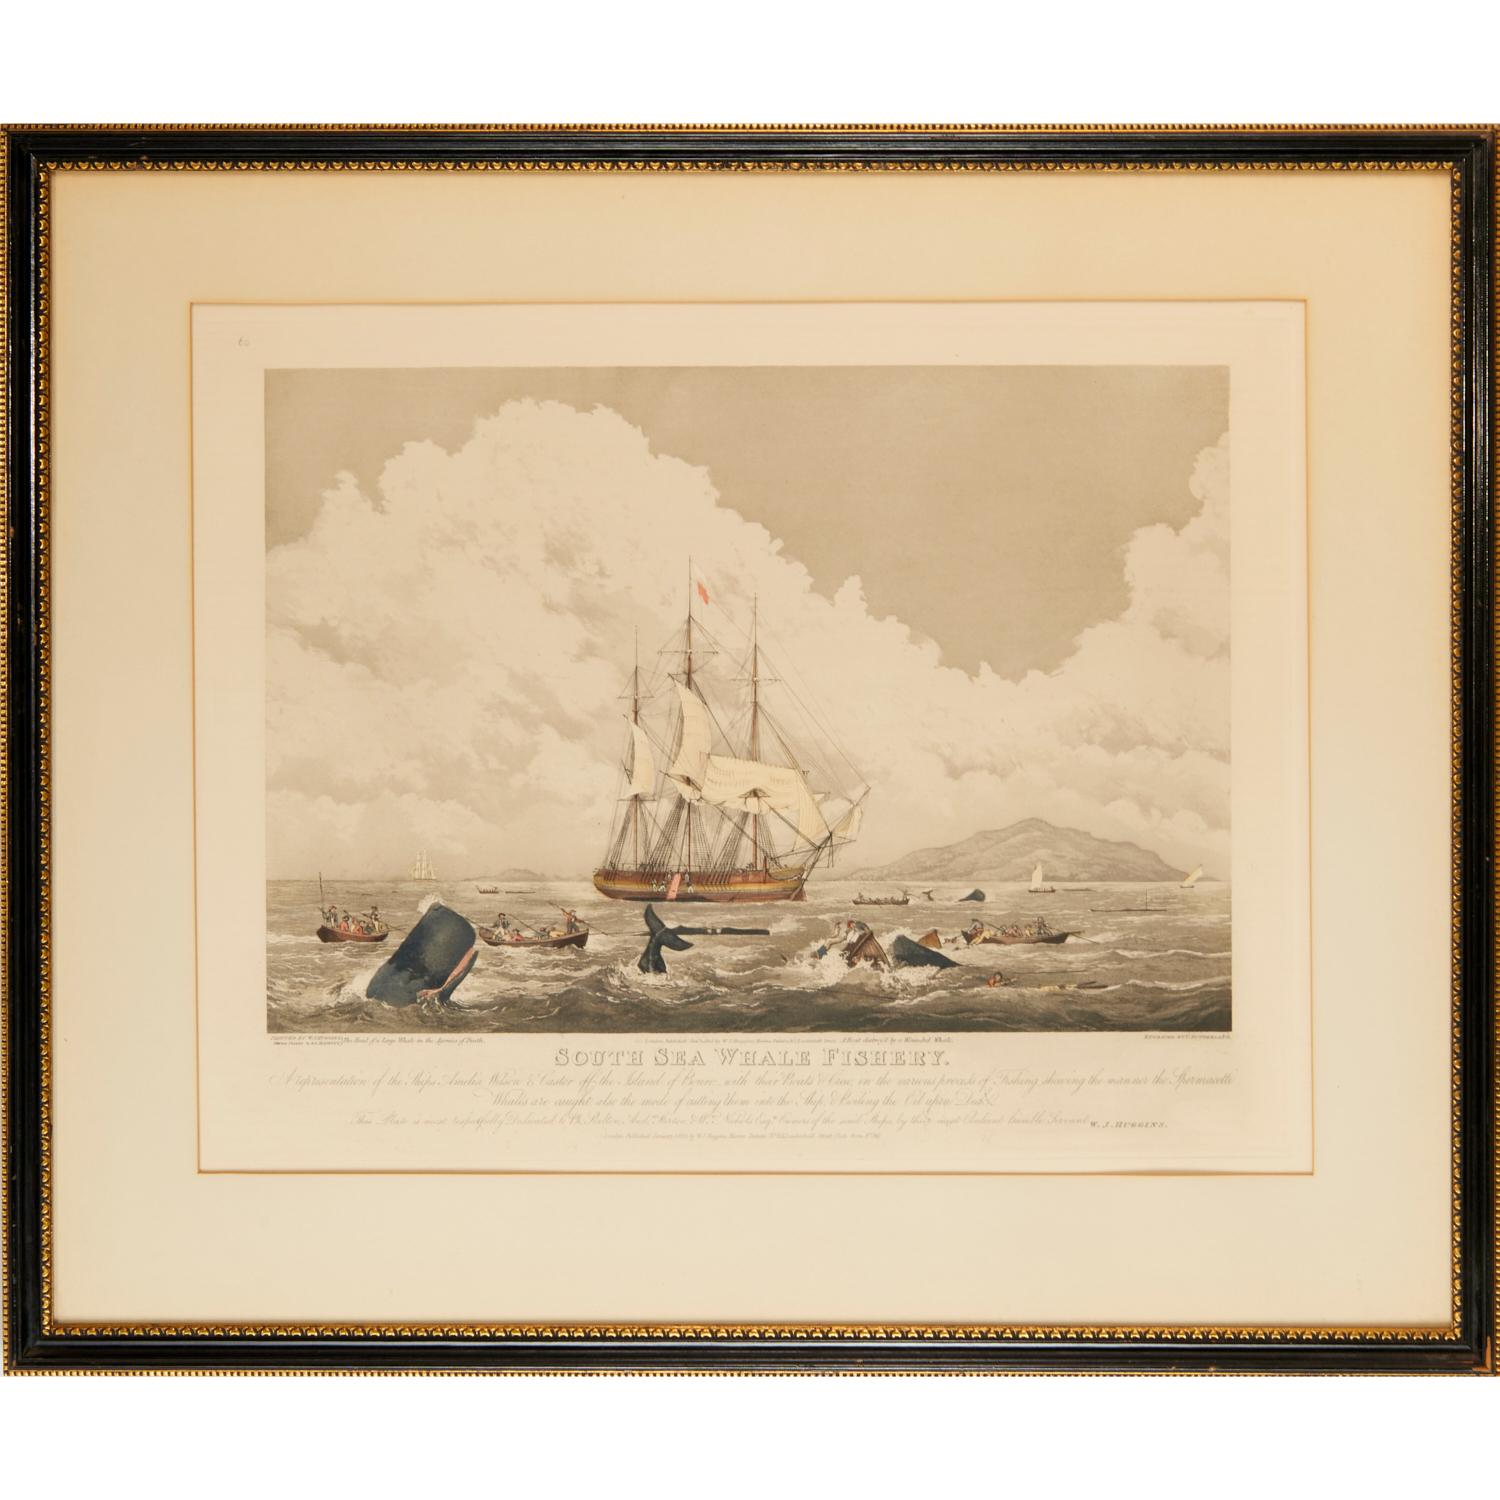 1825 Hand-Colored Aquatint Engraving by T. Sutherland 